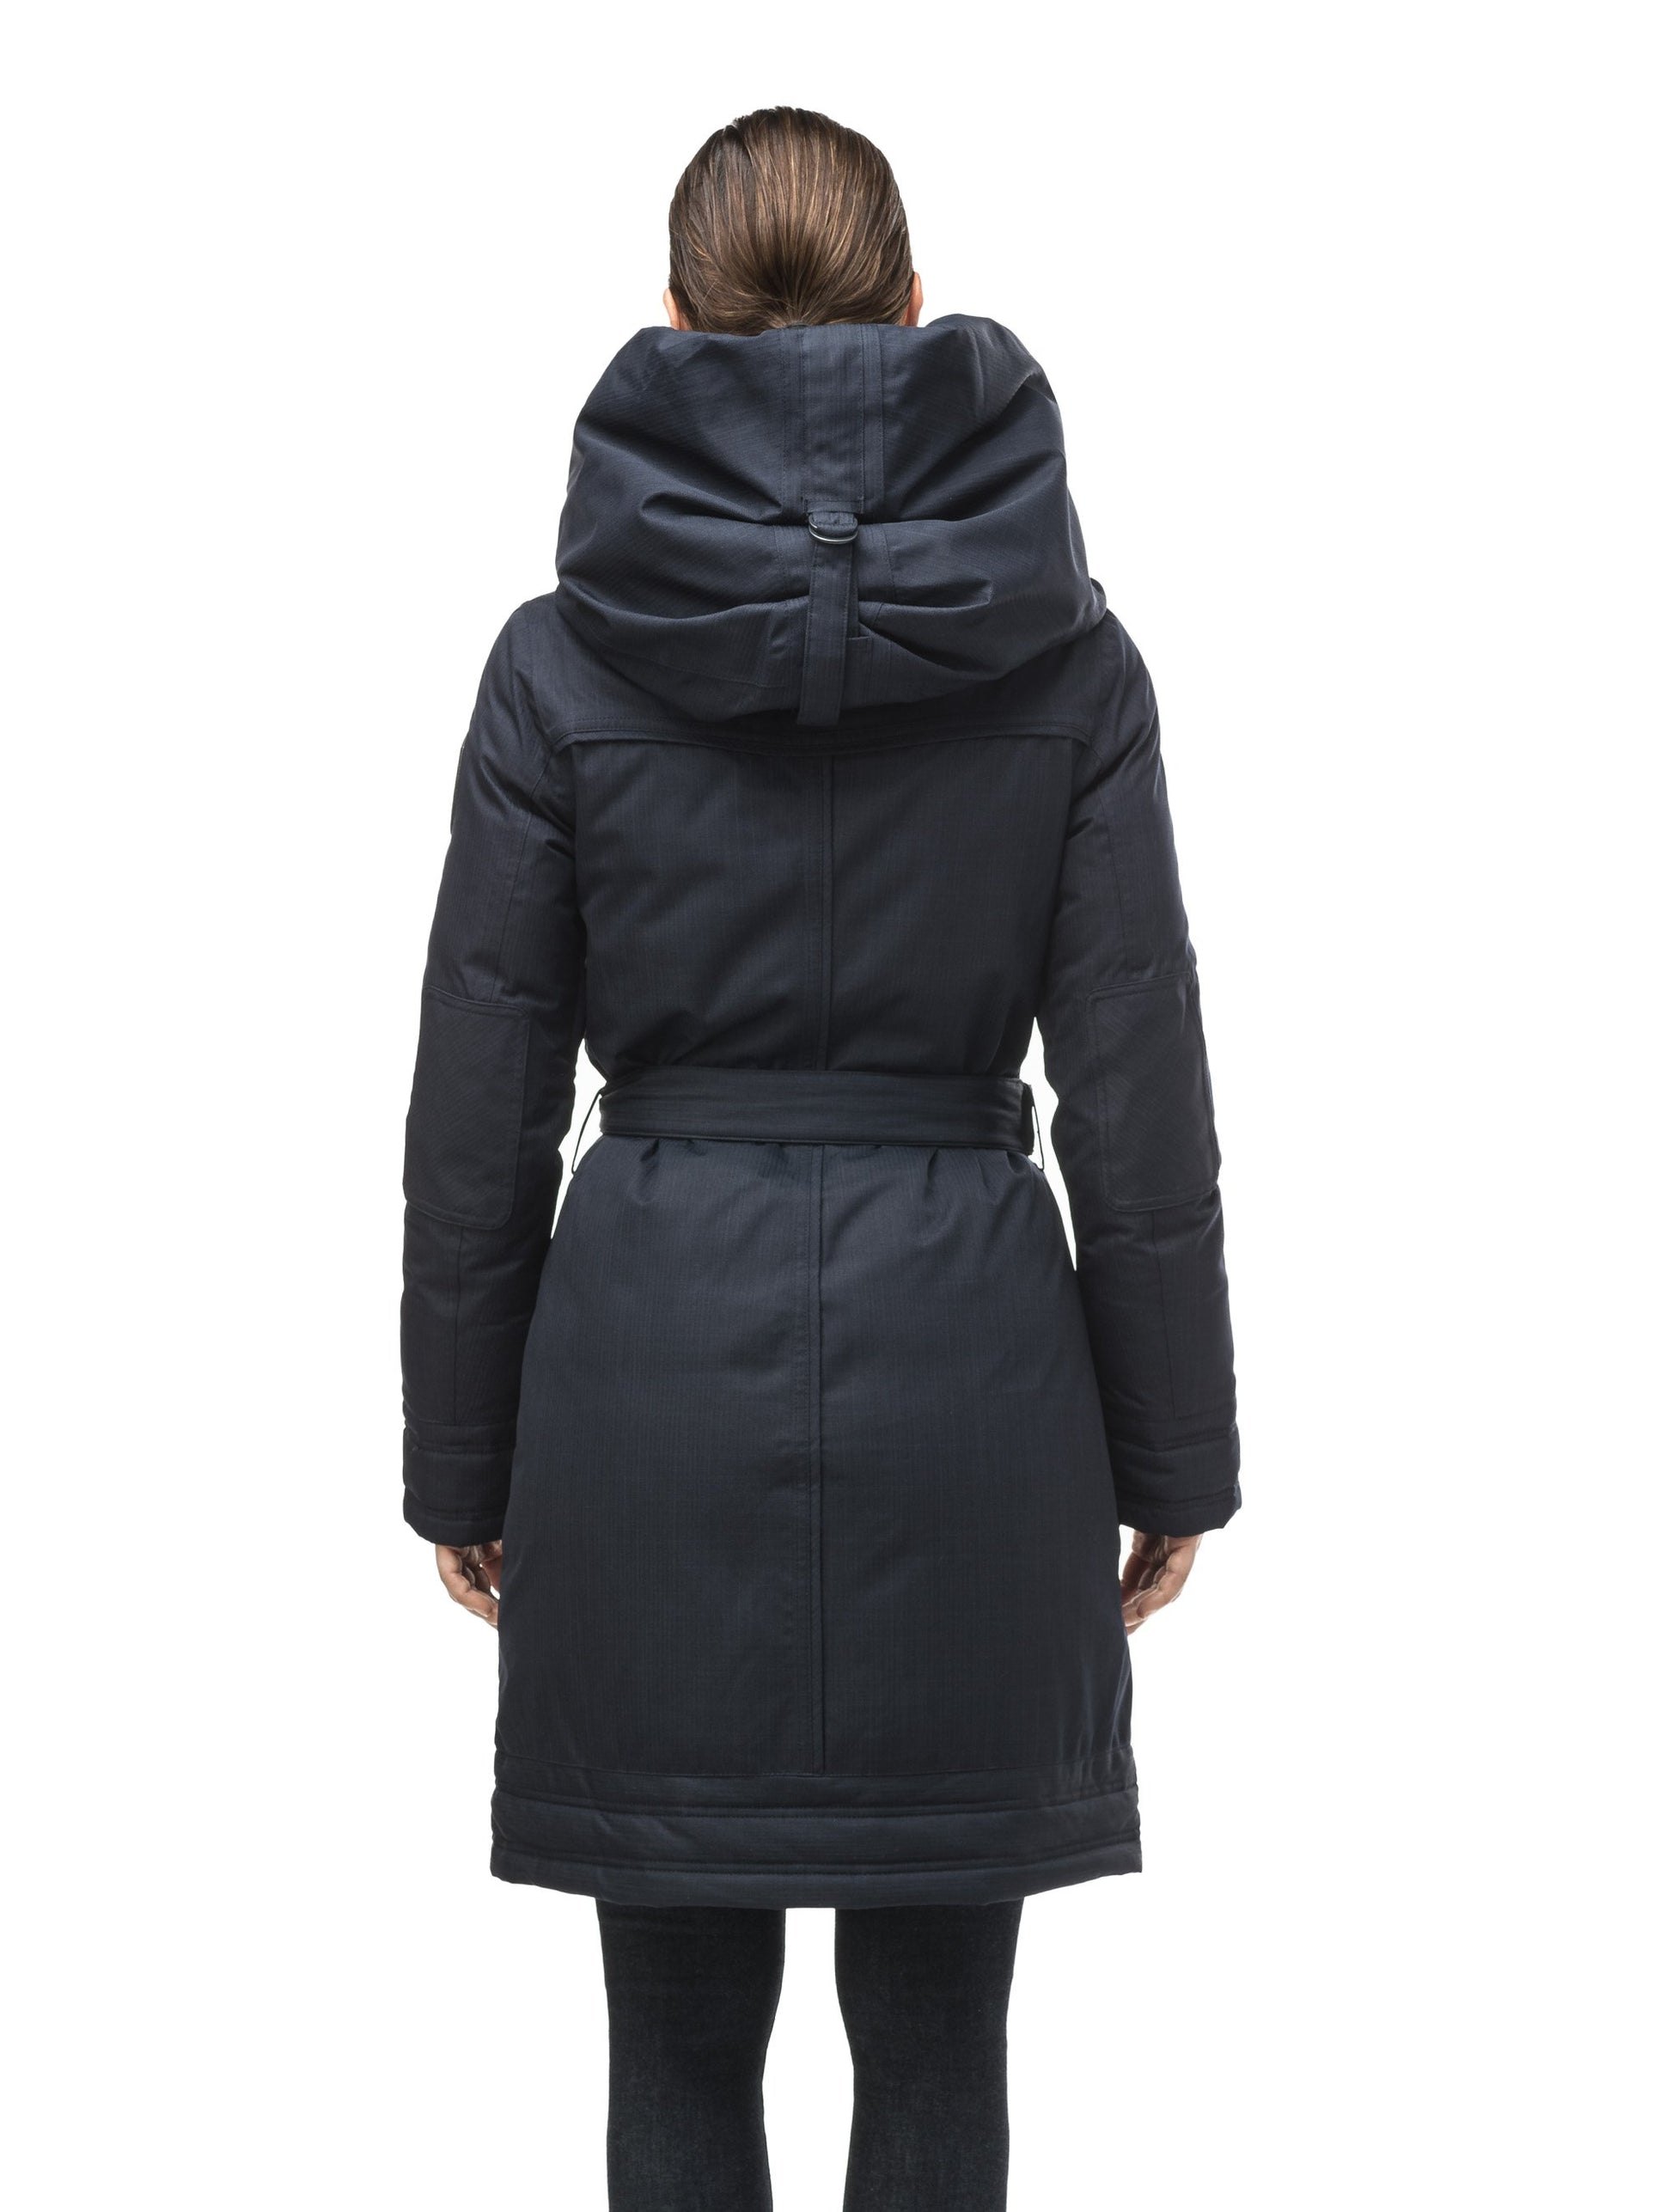 Women's Thigh length own parka with a furless oversized hood in CH Navy